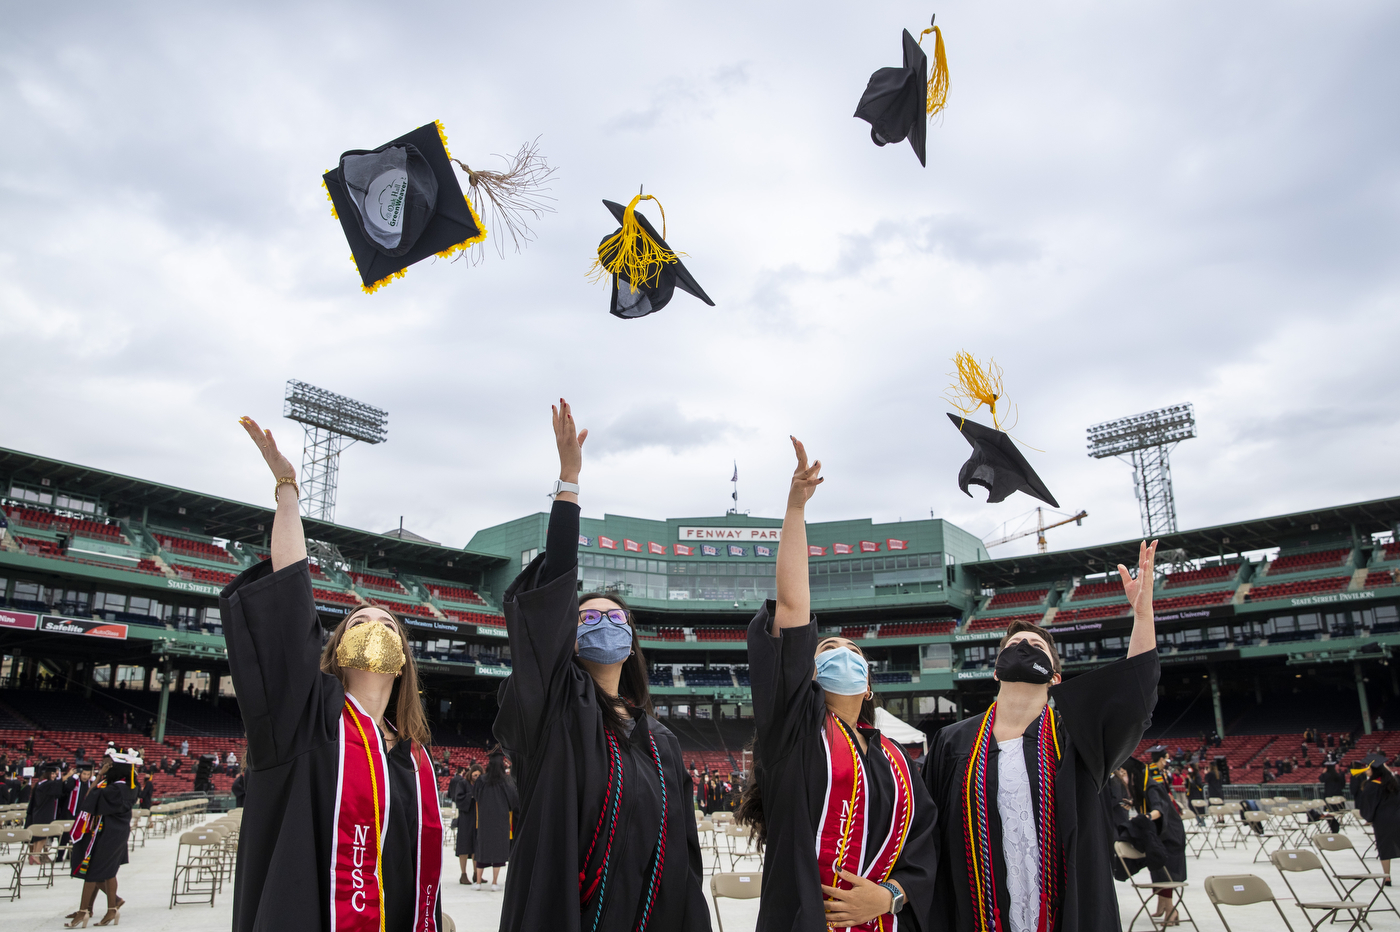 The crowd at Fenway Park filled up the stadium with cheers on Saturday, in a celebration of the graduates of Northeastern University Class of 2021.